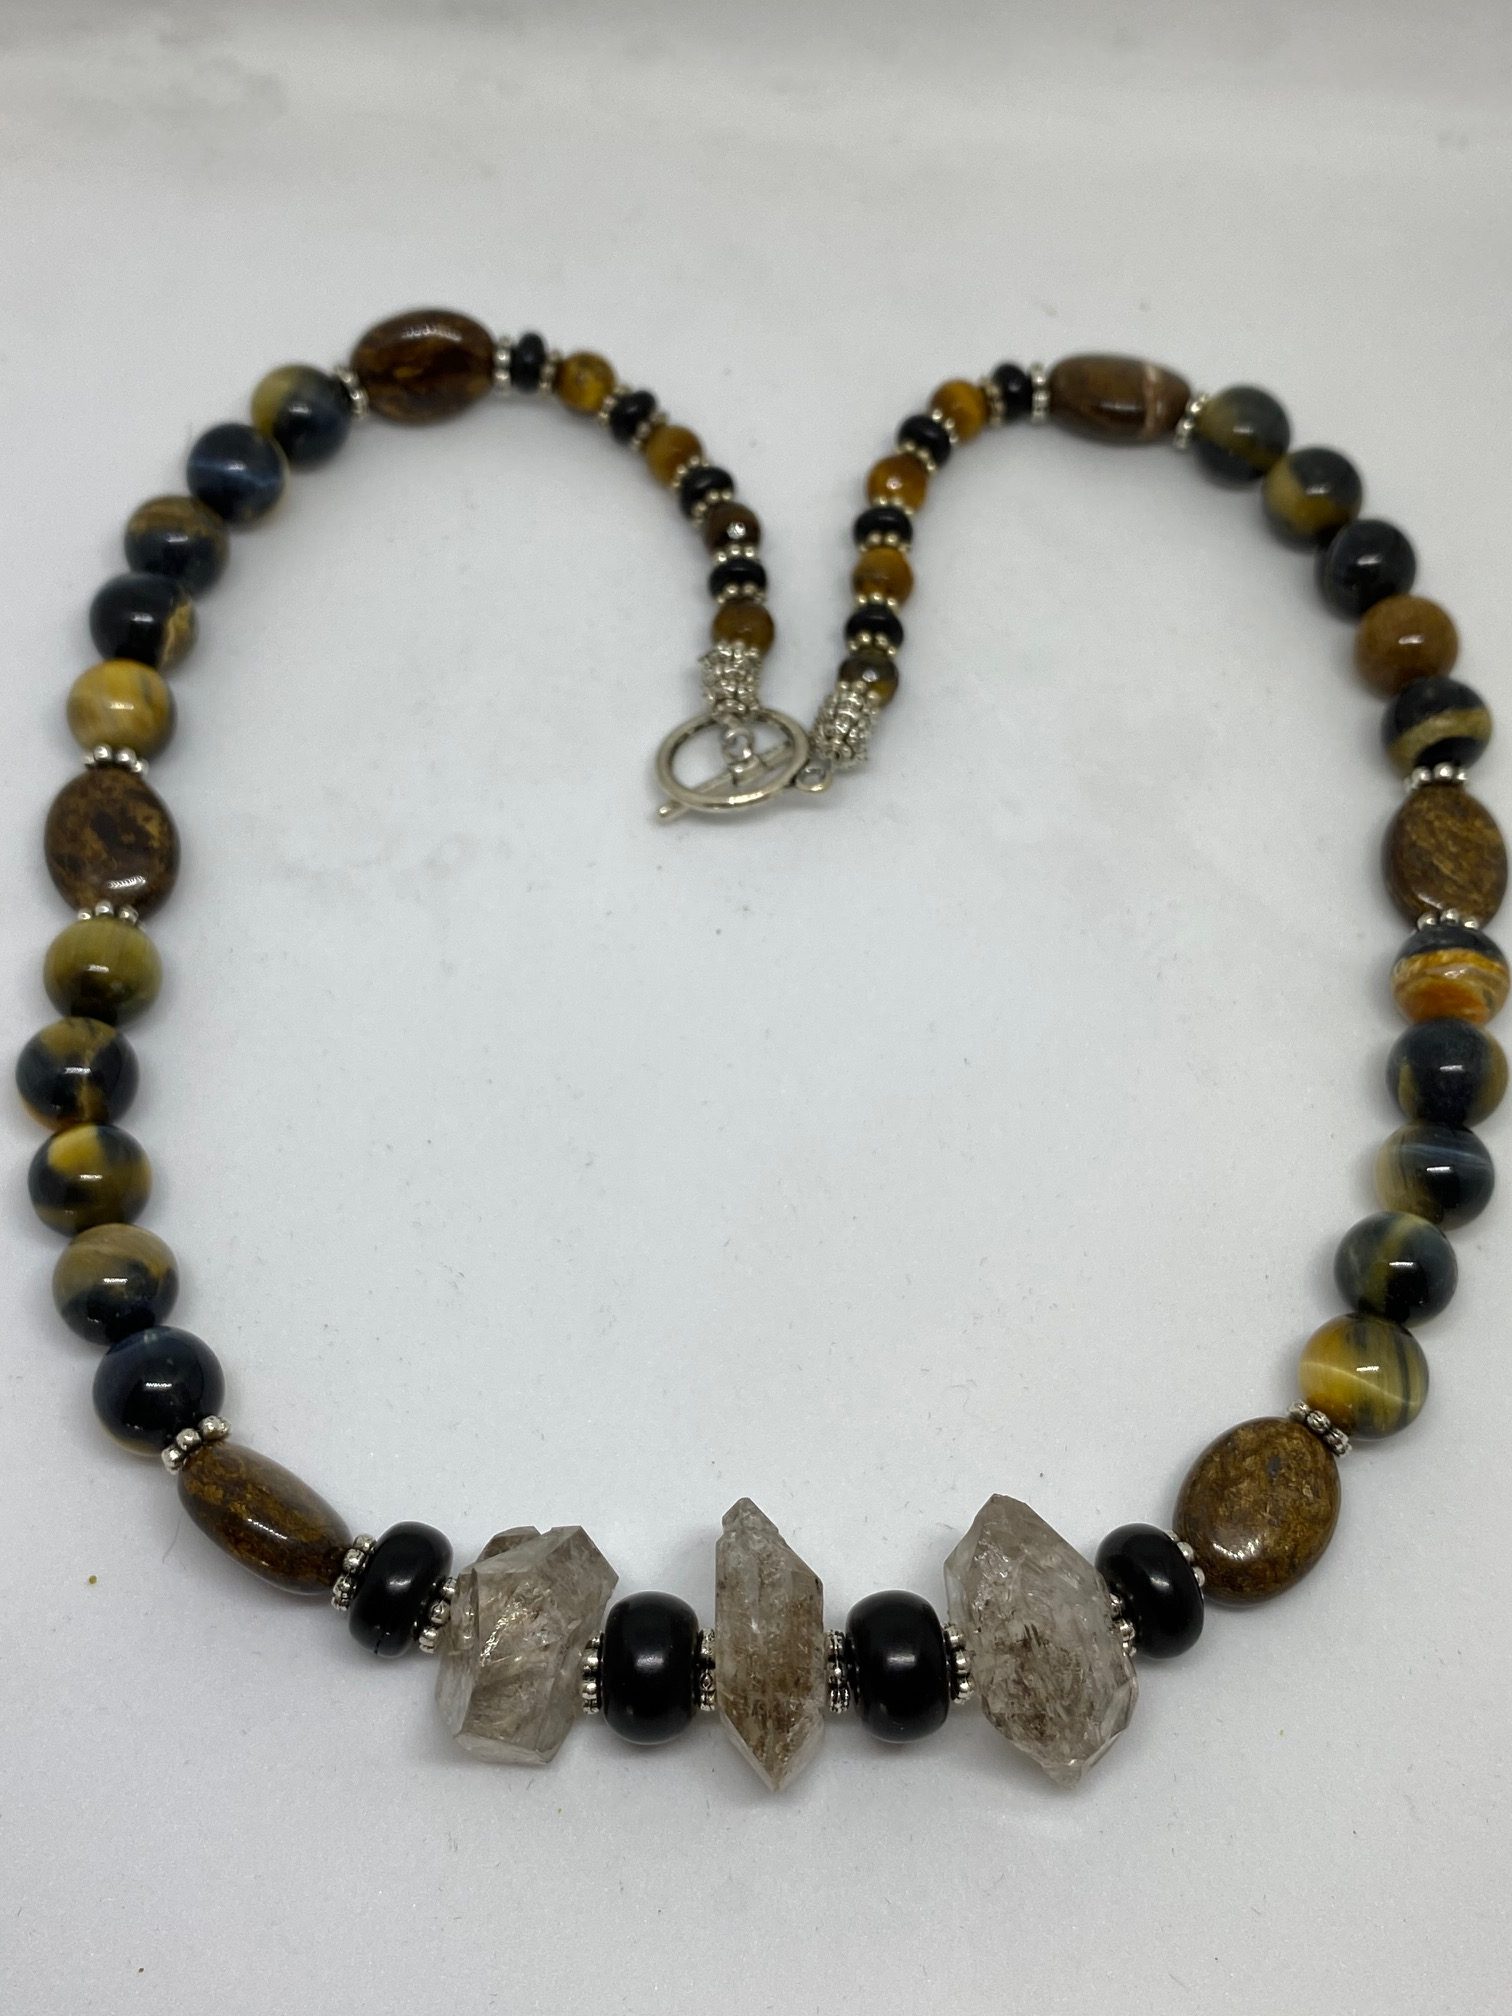 Blue Tiger Eye, Herkimer Diamond, Bronzite, and Jet Necklace. This necklace promotes Clear Communication, Psychic Development, Courage, and Protection. 